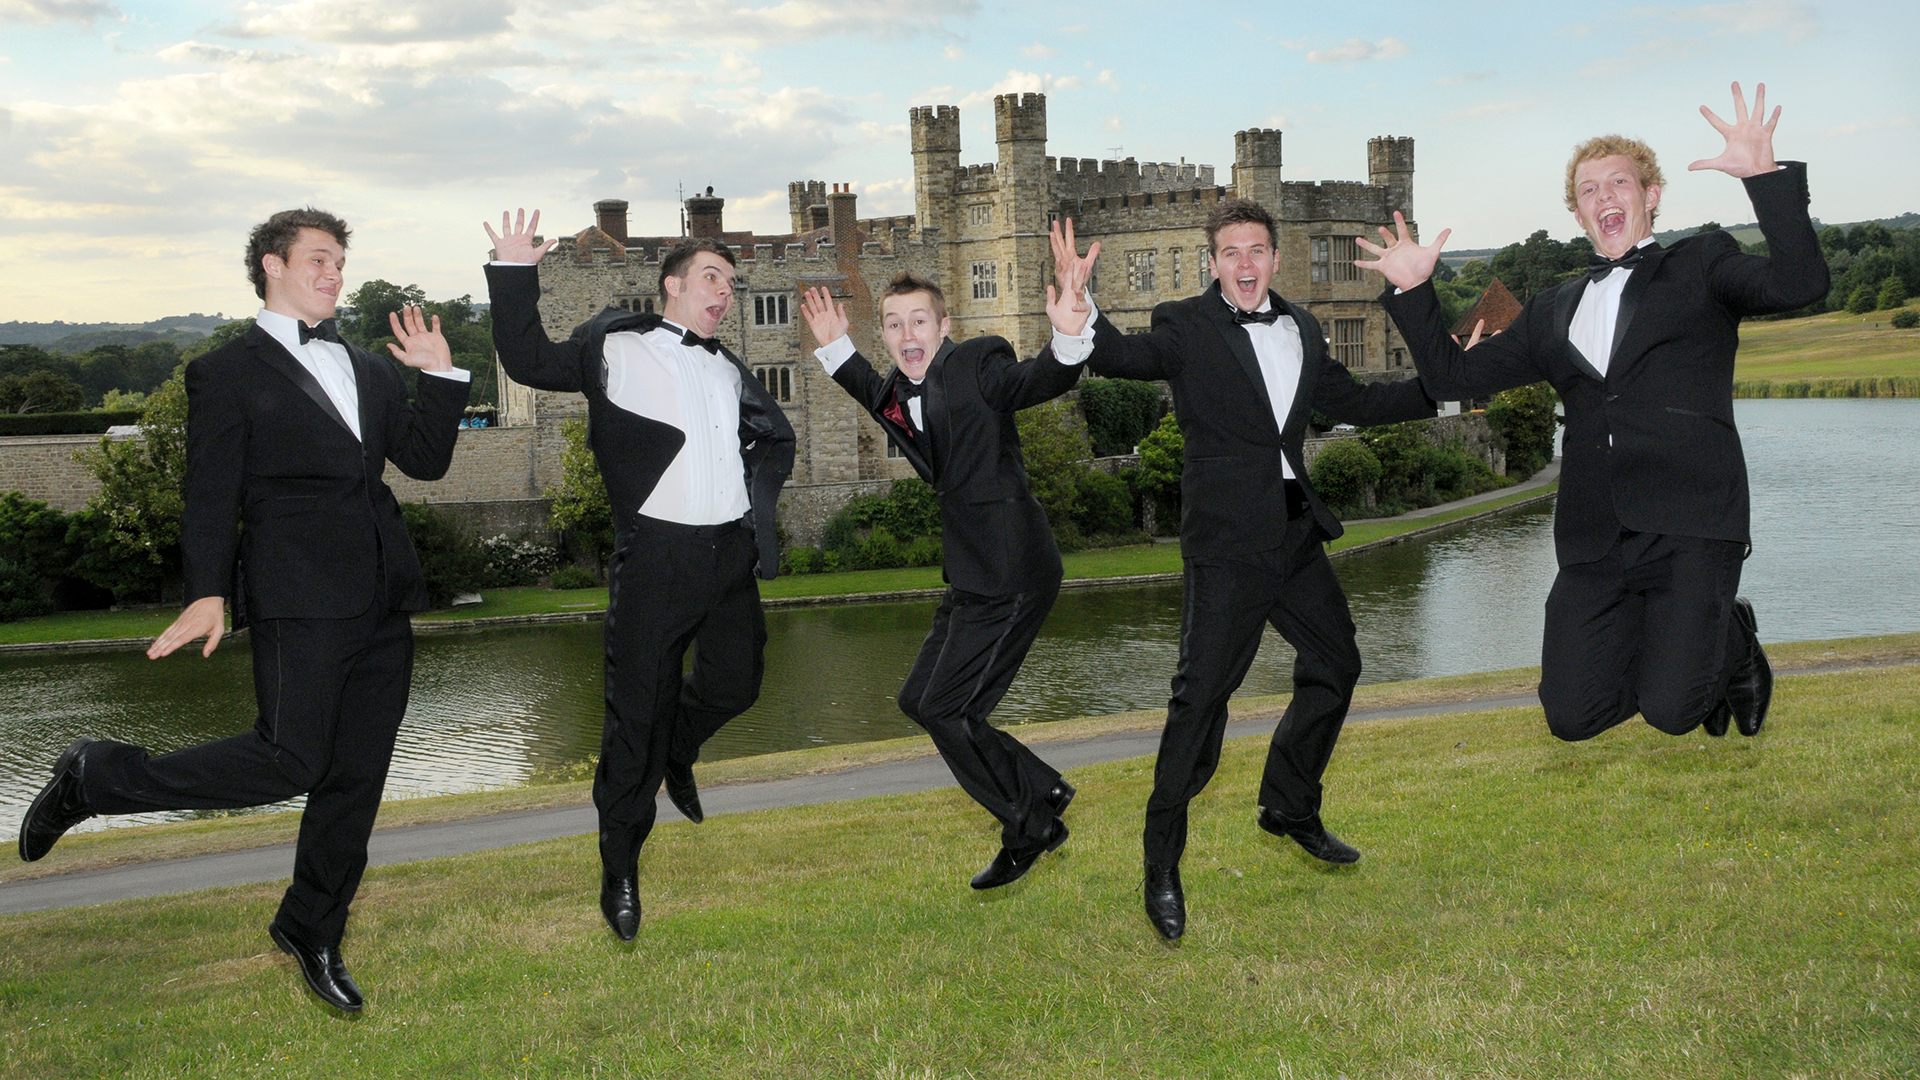 Proms and Event photography in Maidstone Kent